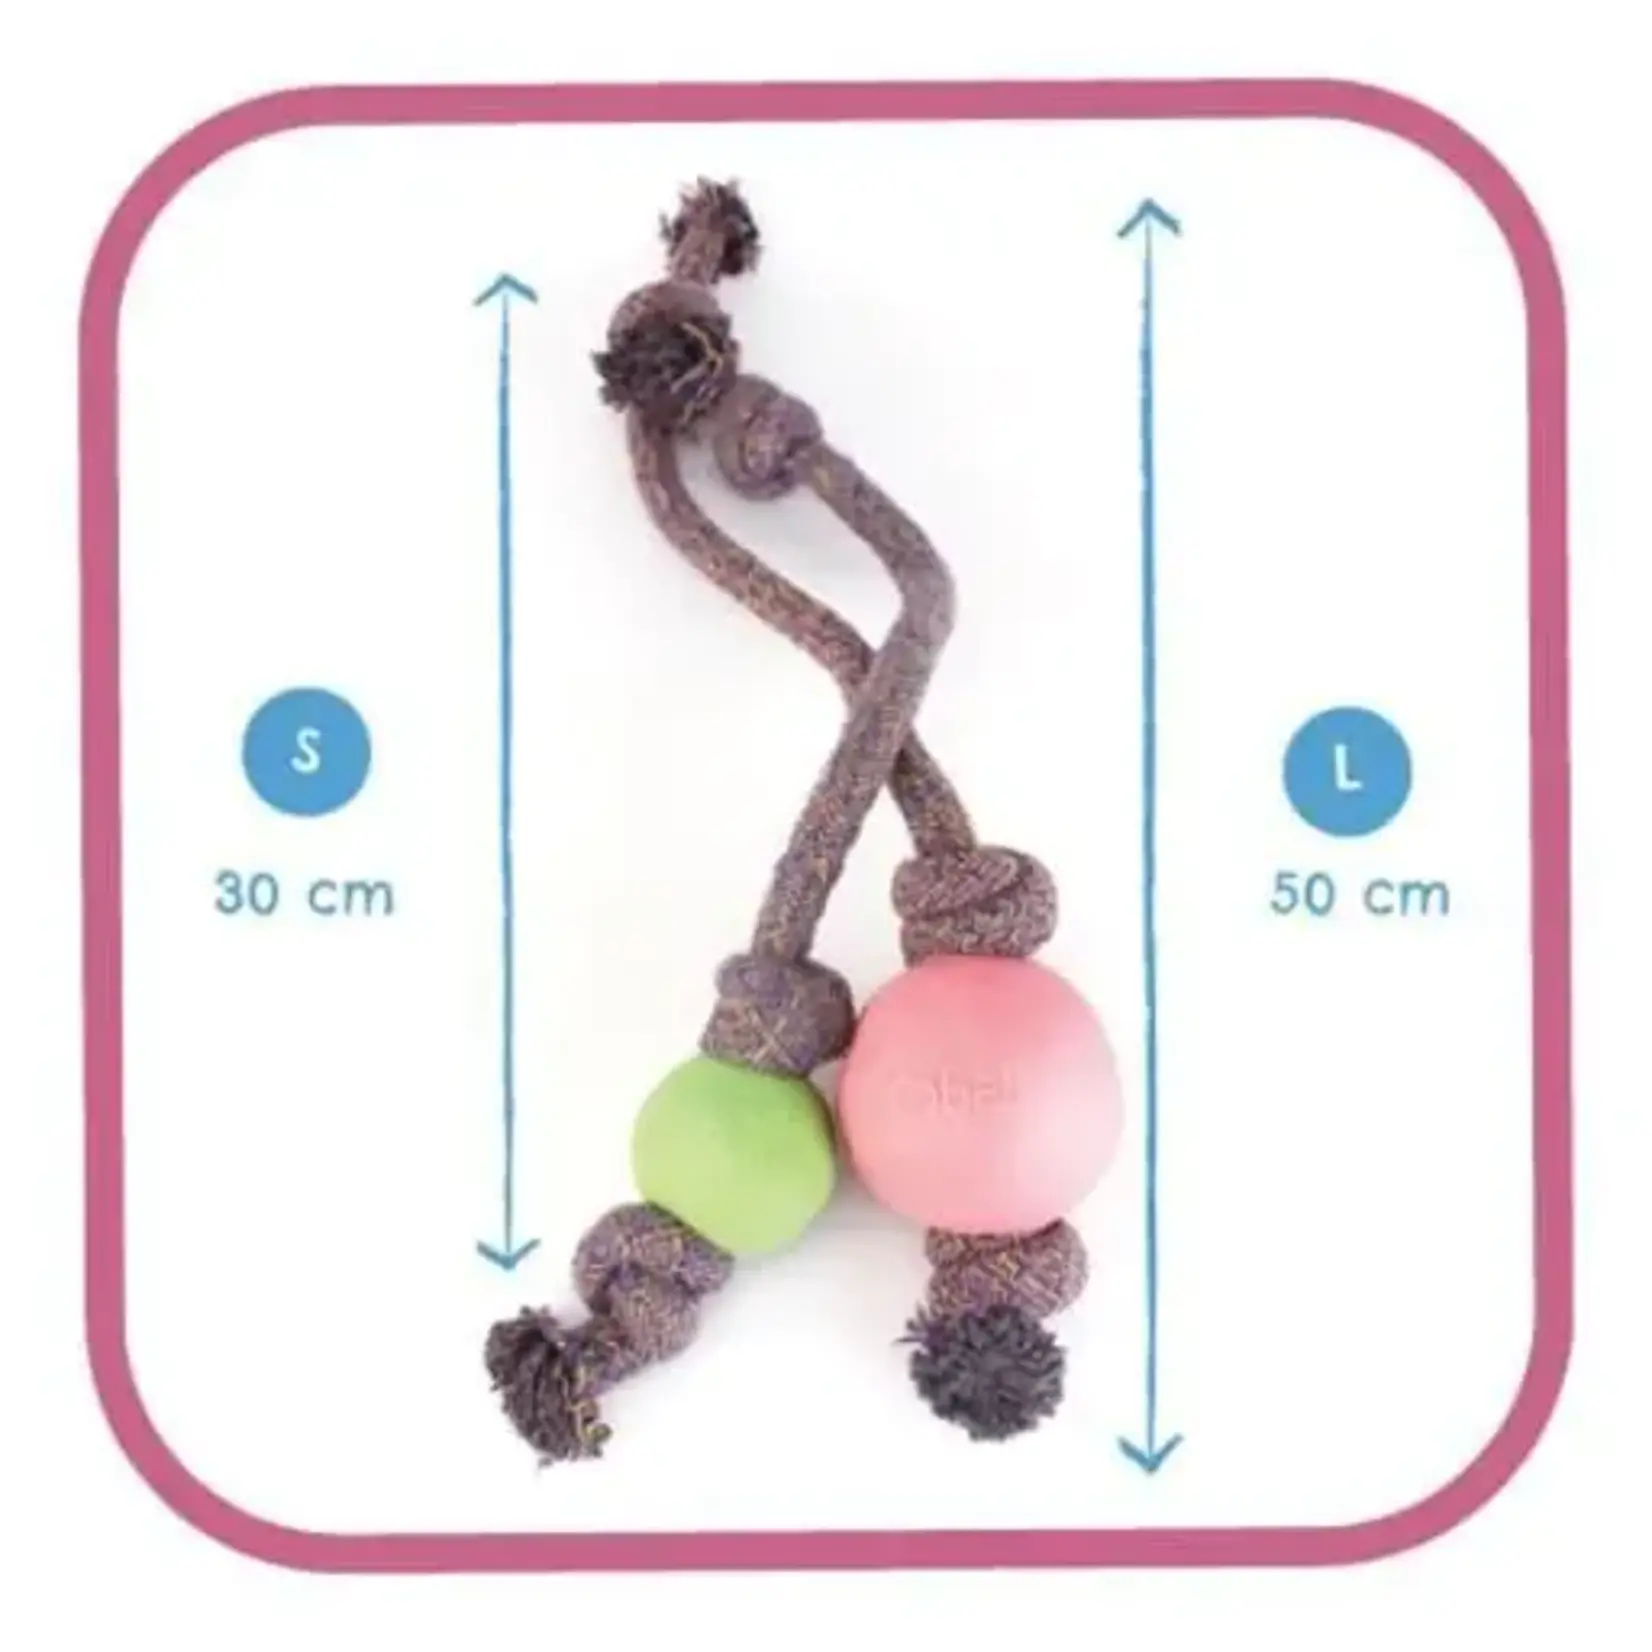 Beco Pets Beco Ball on a Rope Dog Toy